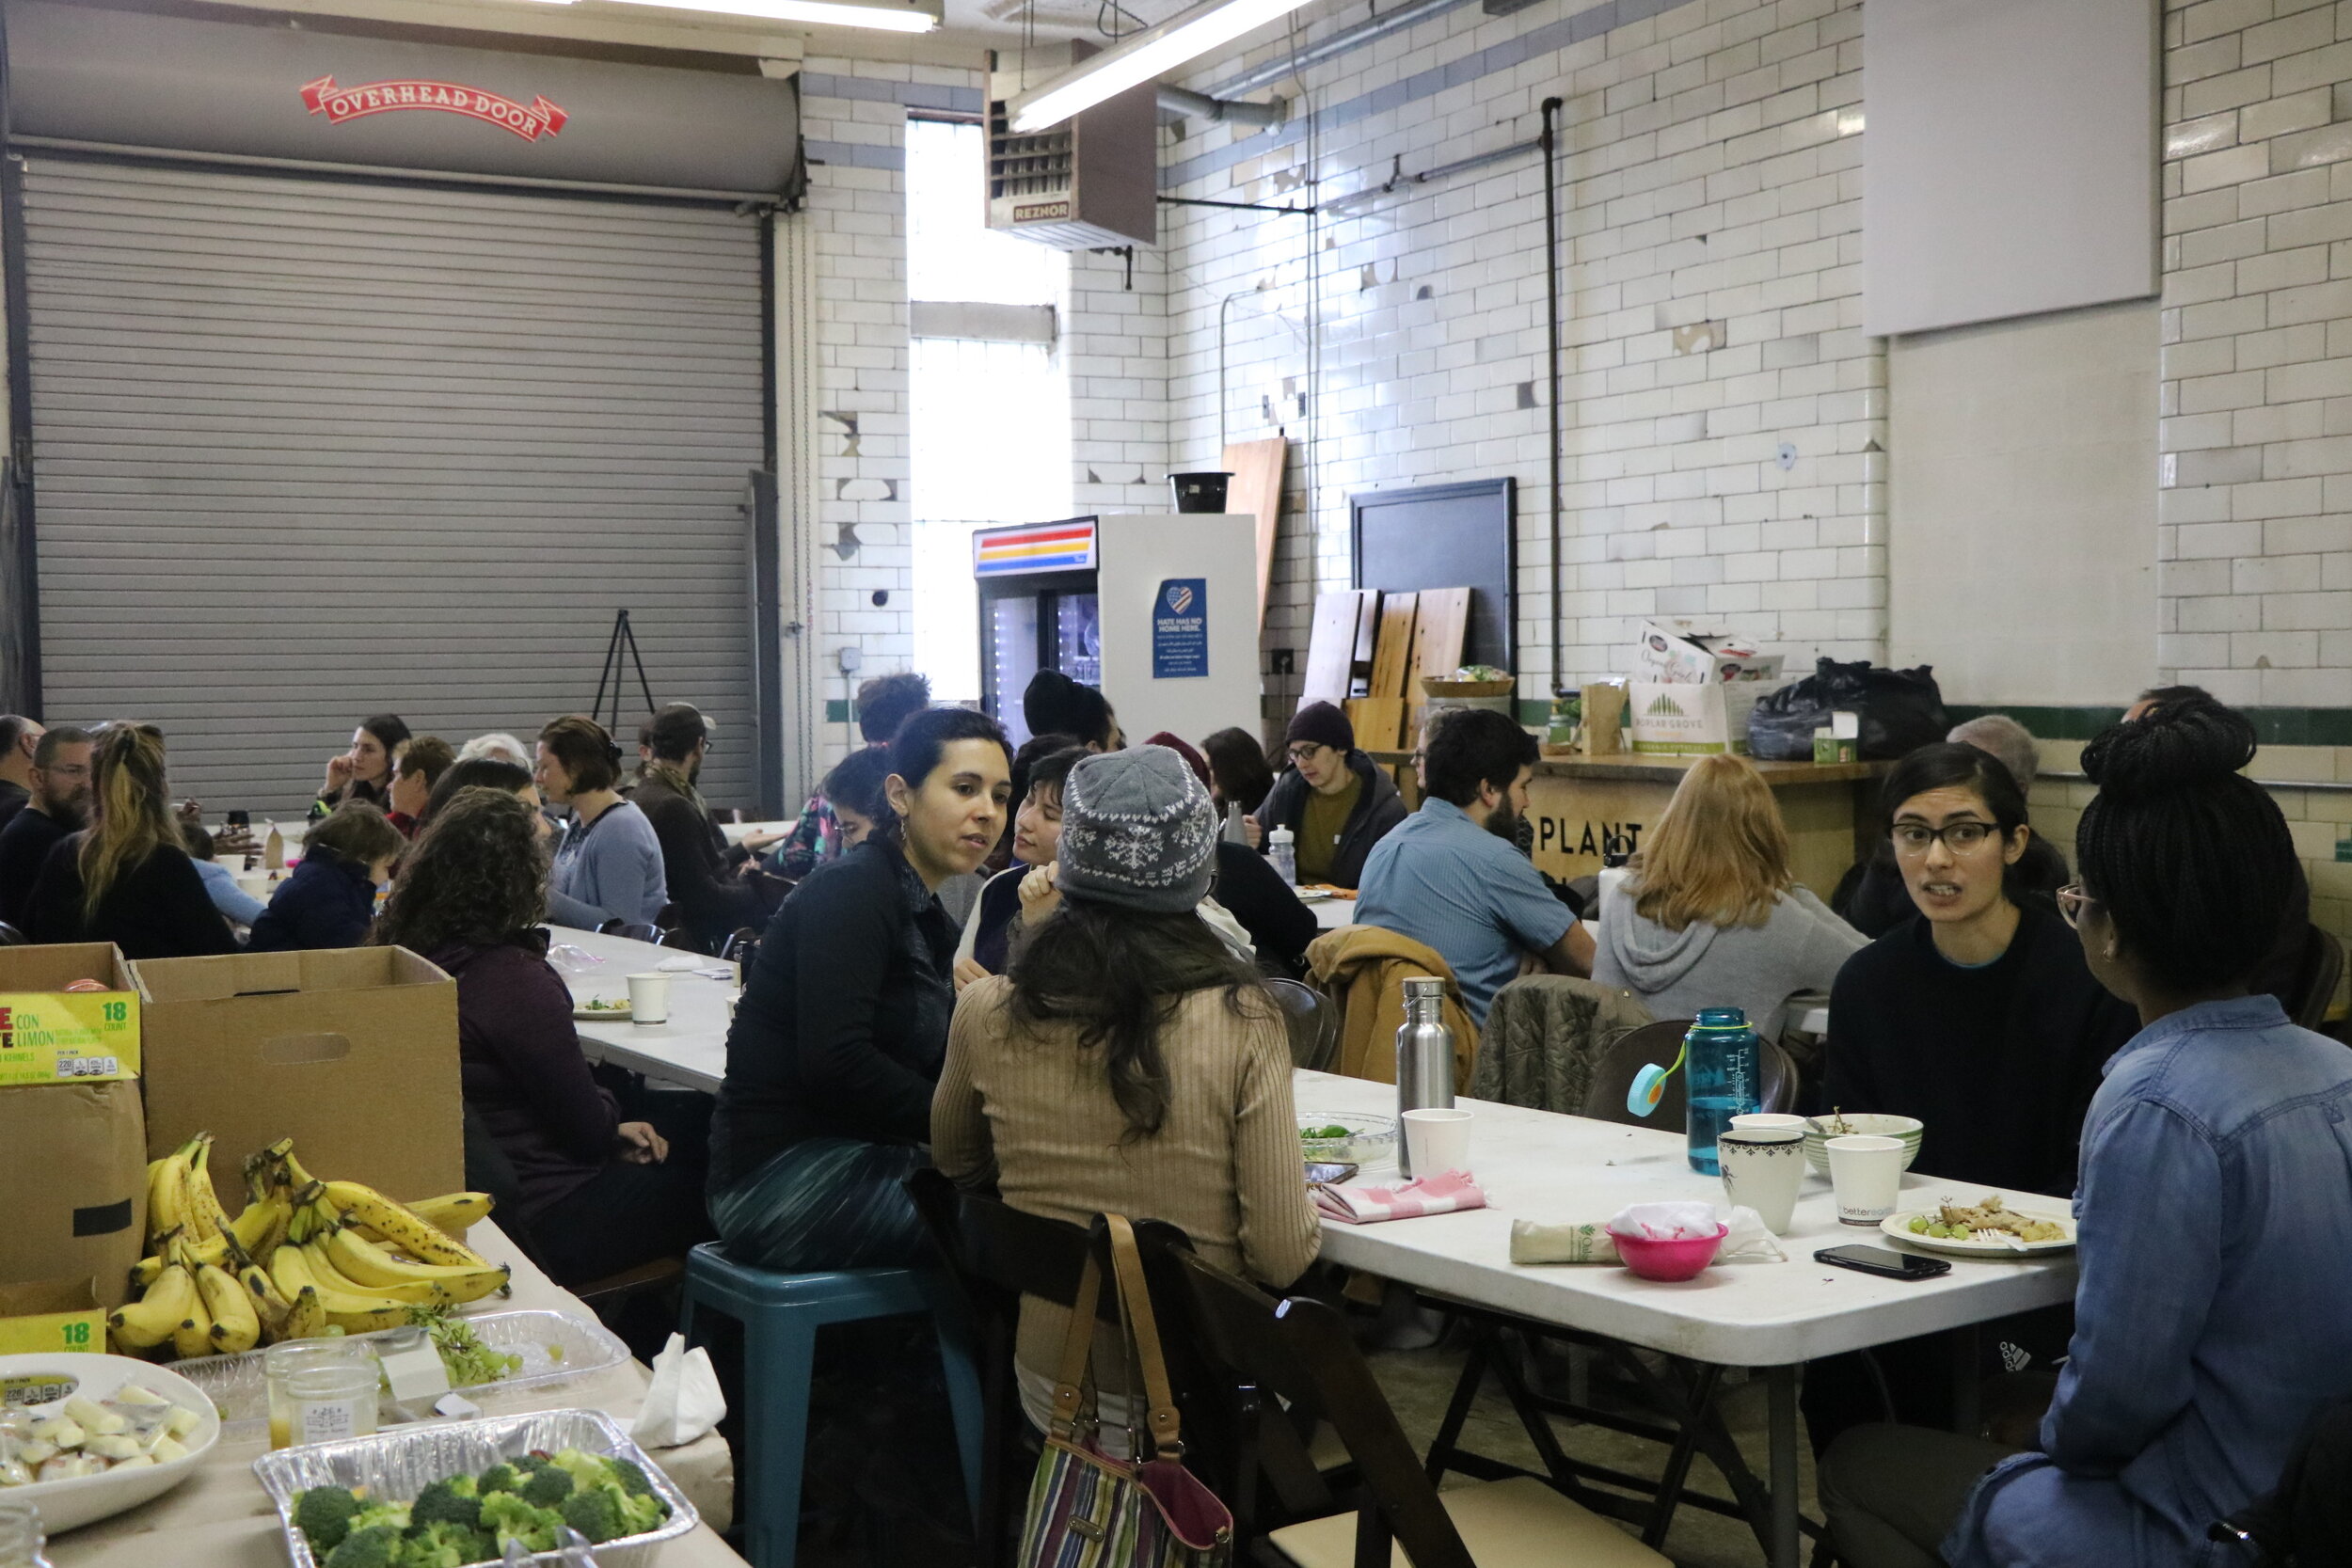  Summit attendees enjoy a potluck meal during a lunch break on Sunday Feb. 16, 2020. 